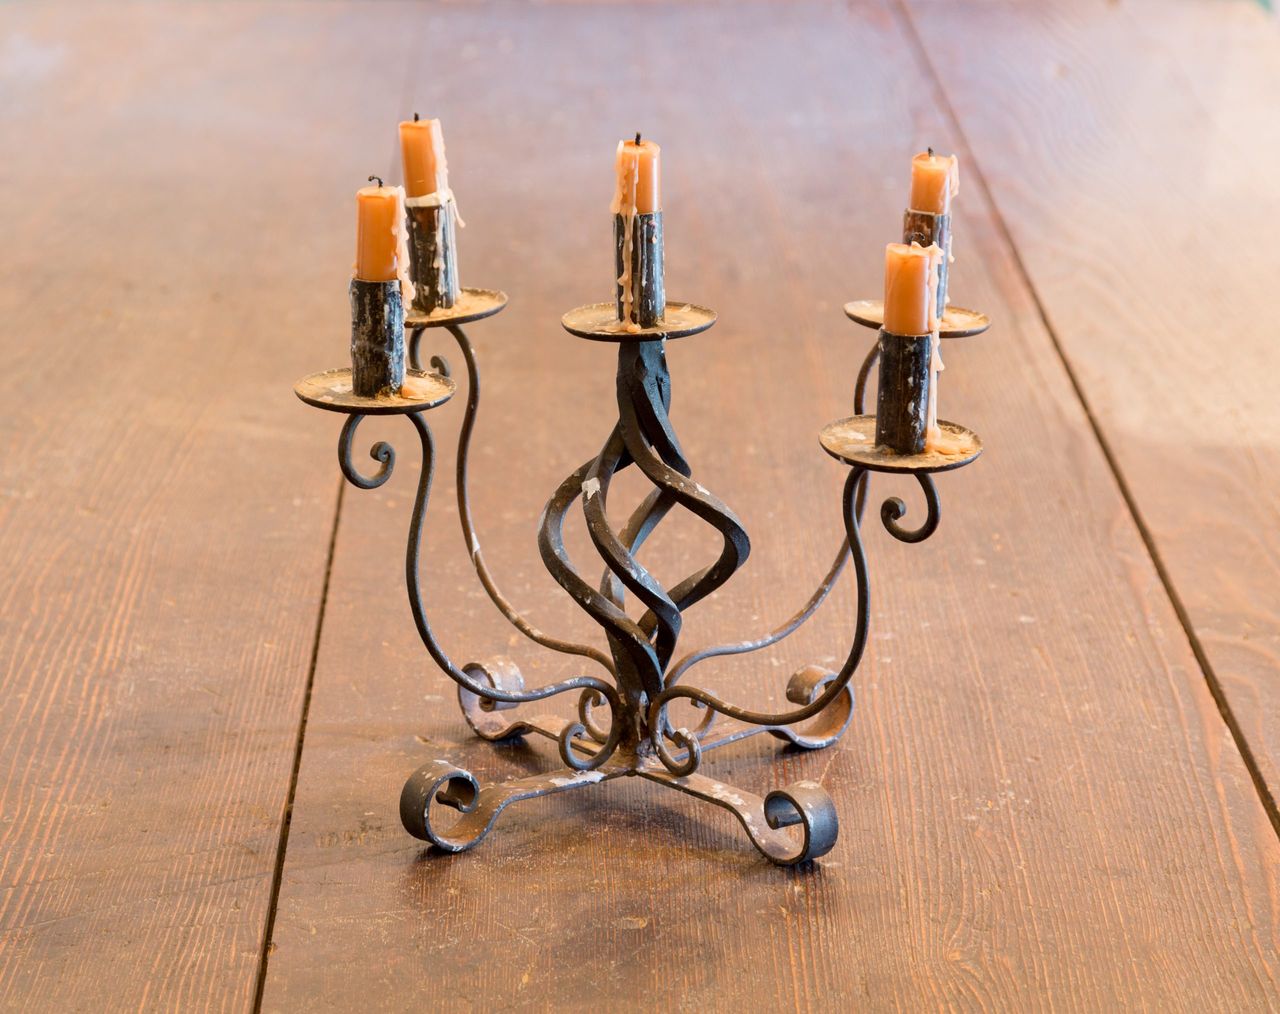 Old iron candlestick holder and candles lit by light from window on old wooden table